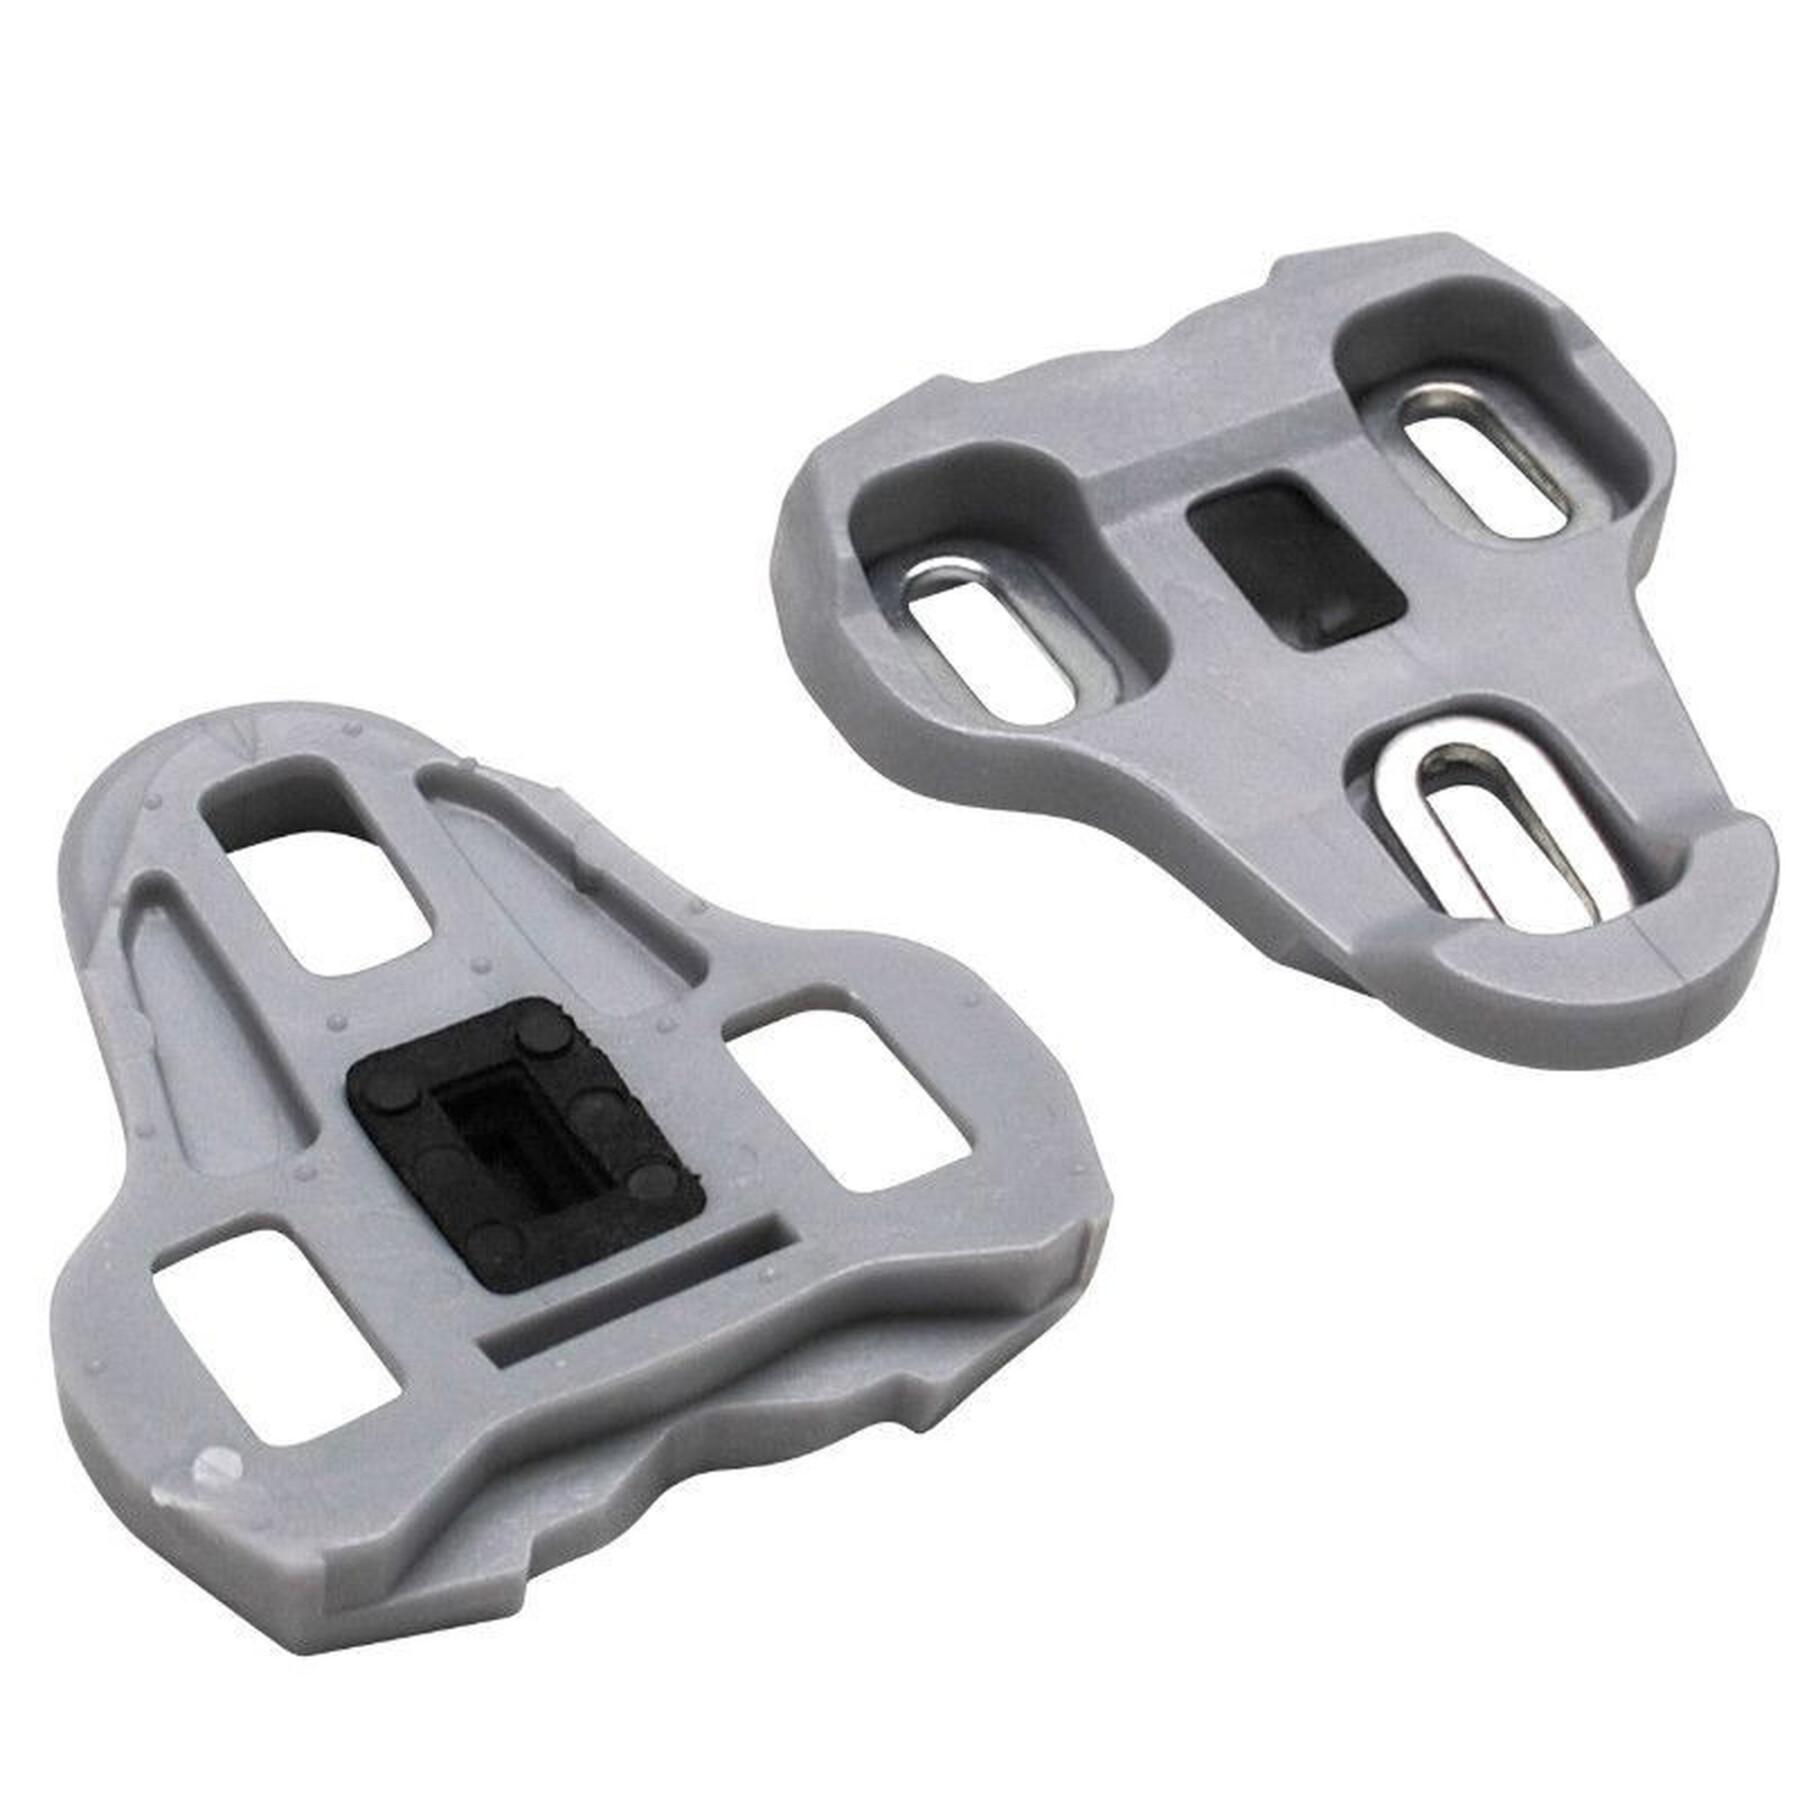 Pair of pedal cleats Roto Type Look Keo